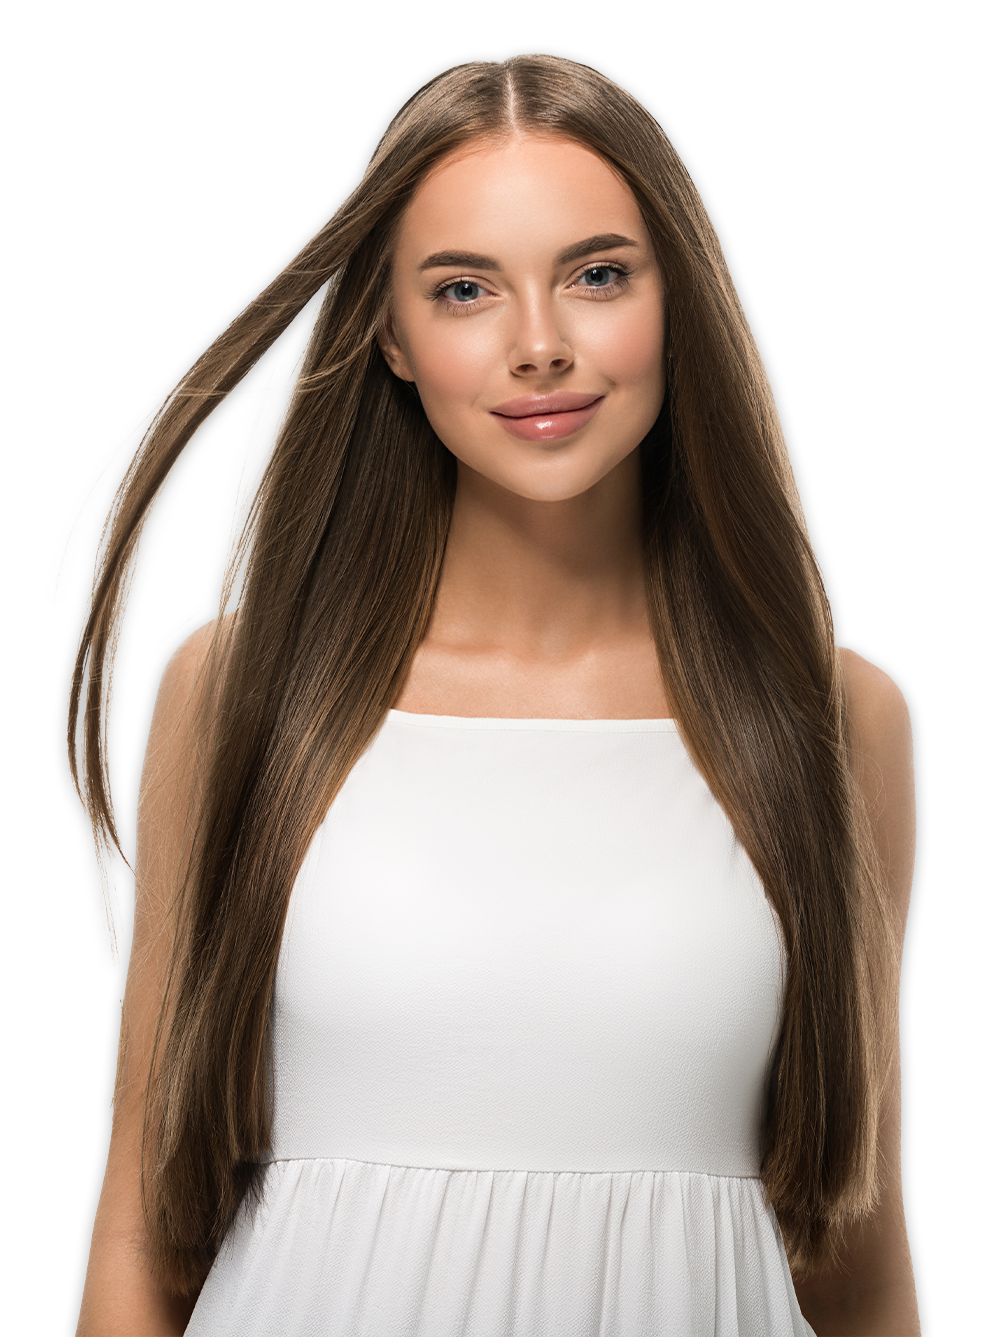 biotin tablets for hair growth price in pakistan